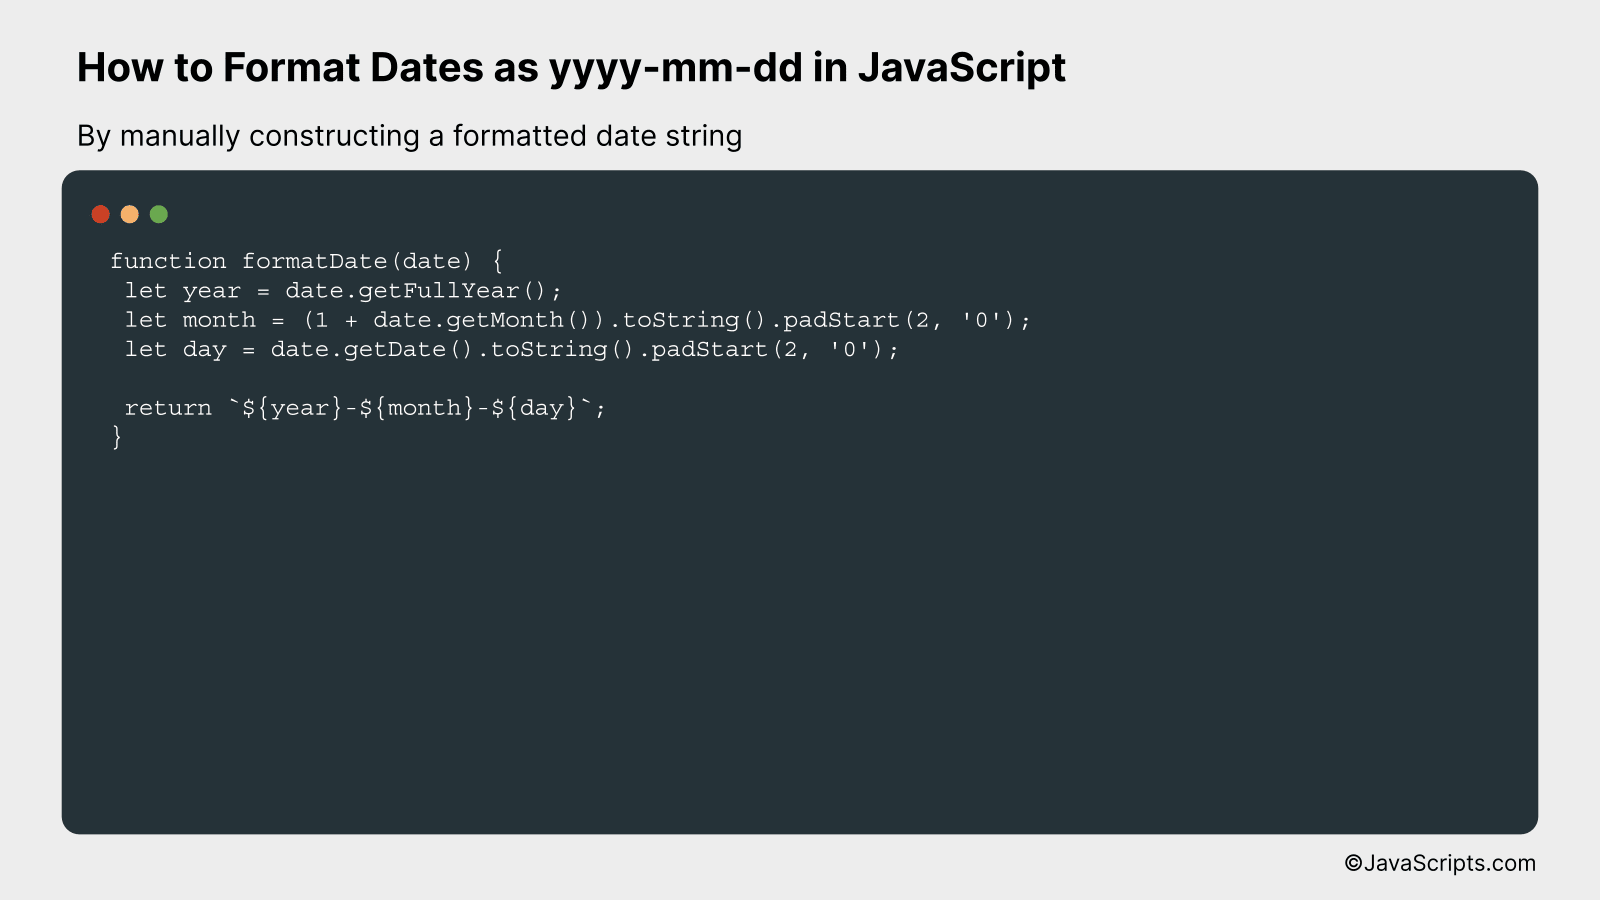 By manually constructing a formatted date string